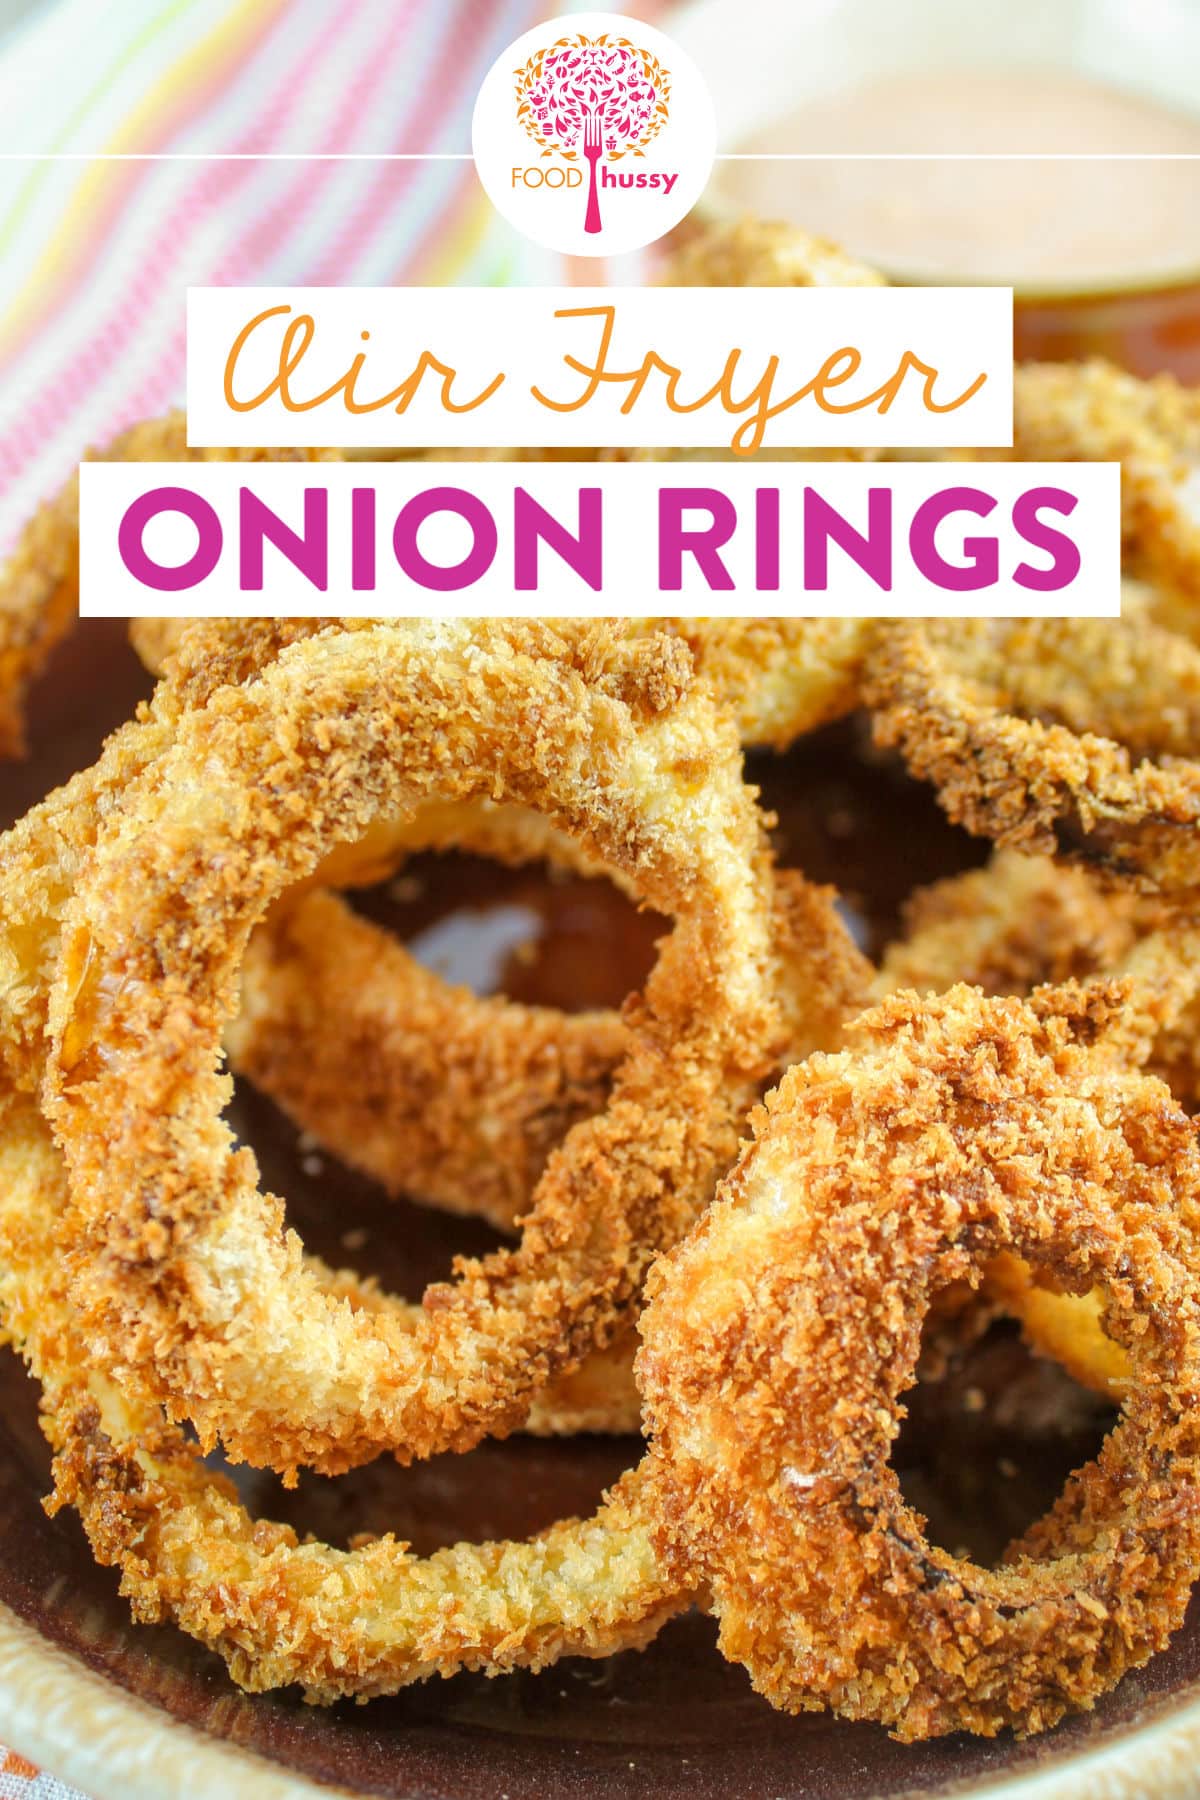 Homemade onion rings in the air fryer are amazing! You can't beat the crispness of these - plus I've got a secret ingredient for more flavor! And I made a fun zingy dippin sauce to go with the air fryer onion rings! Crunchy & saucy! Yum! via @foodhussy